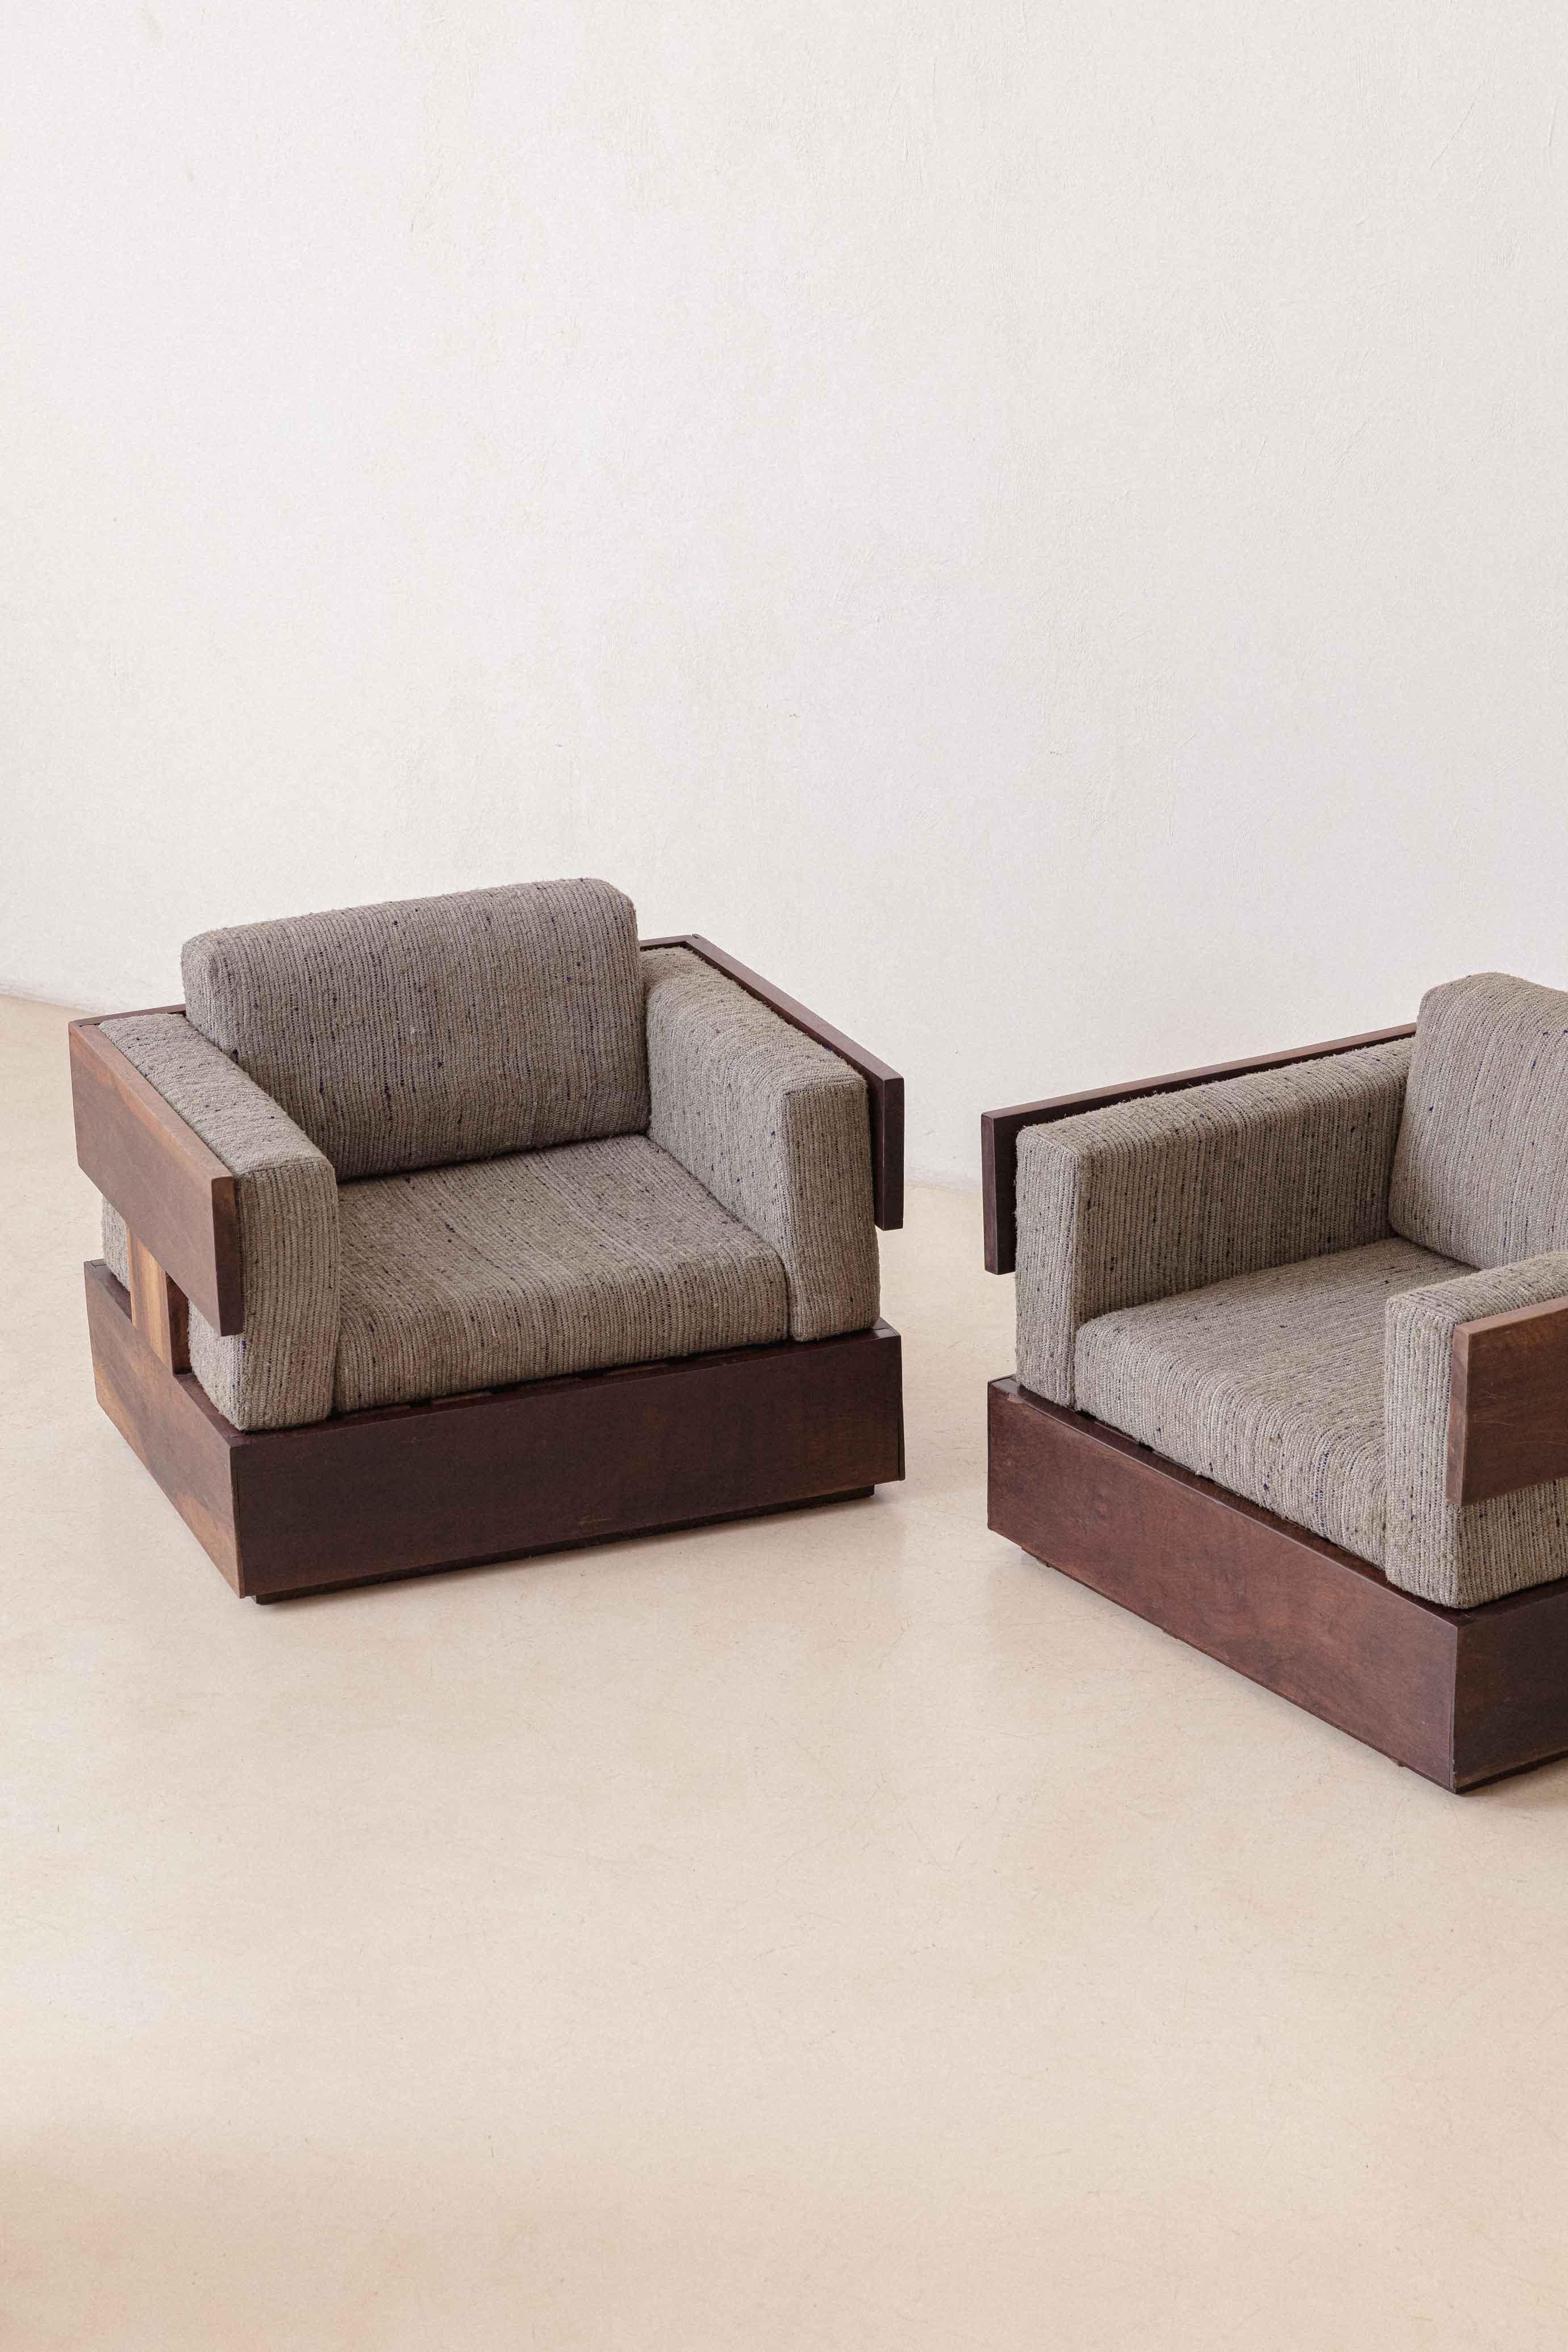 Pair of Rosewood Armchairs by Celina Decorações, Brazilian Midcentury, 1960s For Sale 1